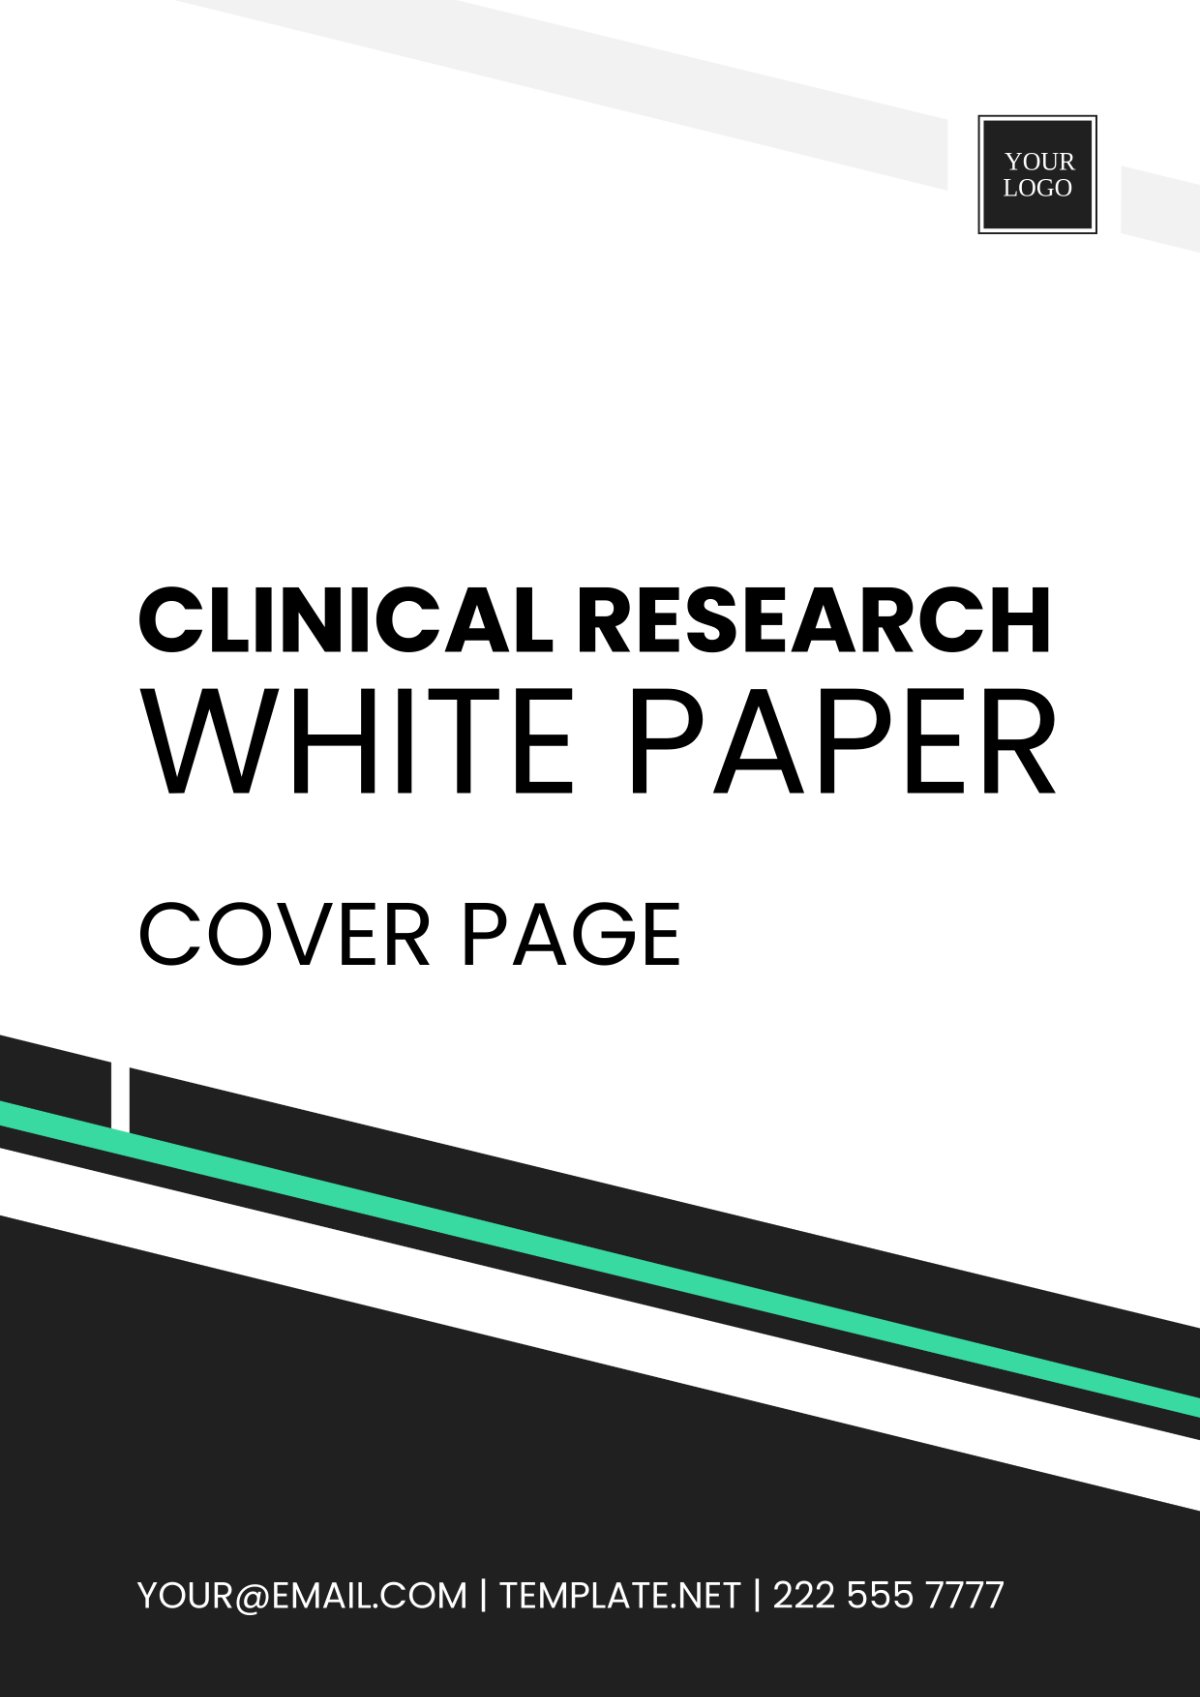 Clinical Research White Paper Cover Page Template